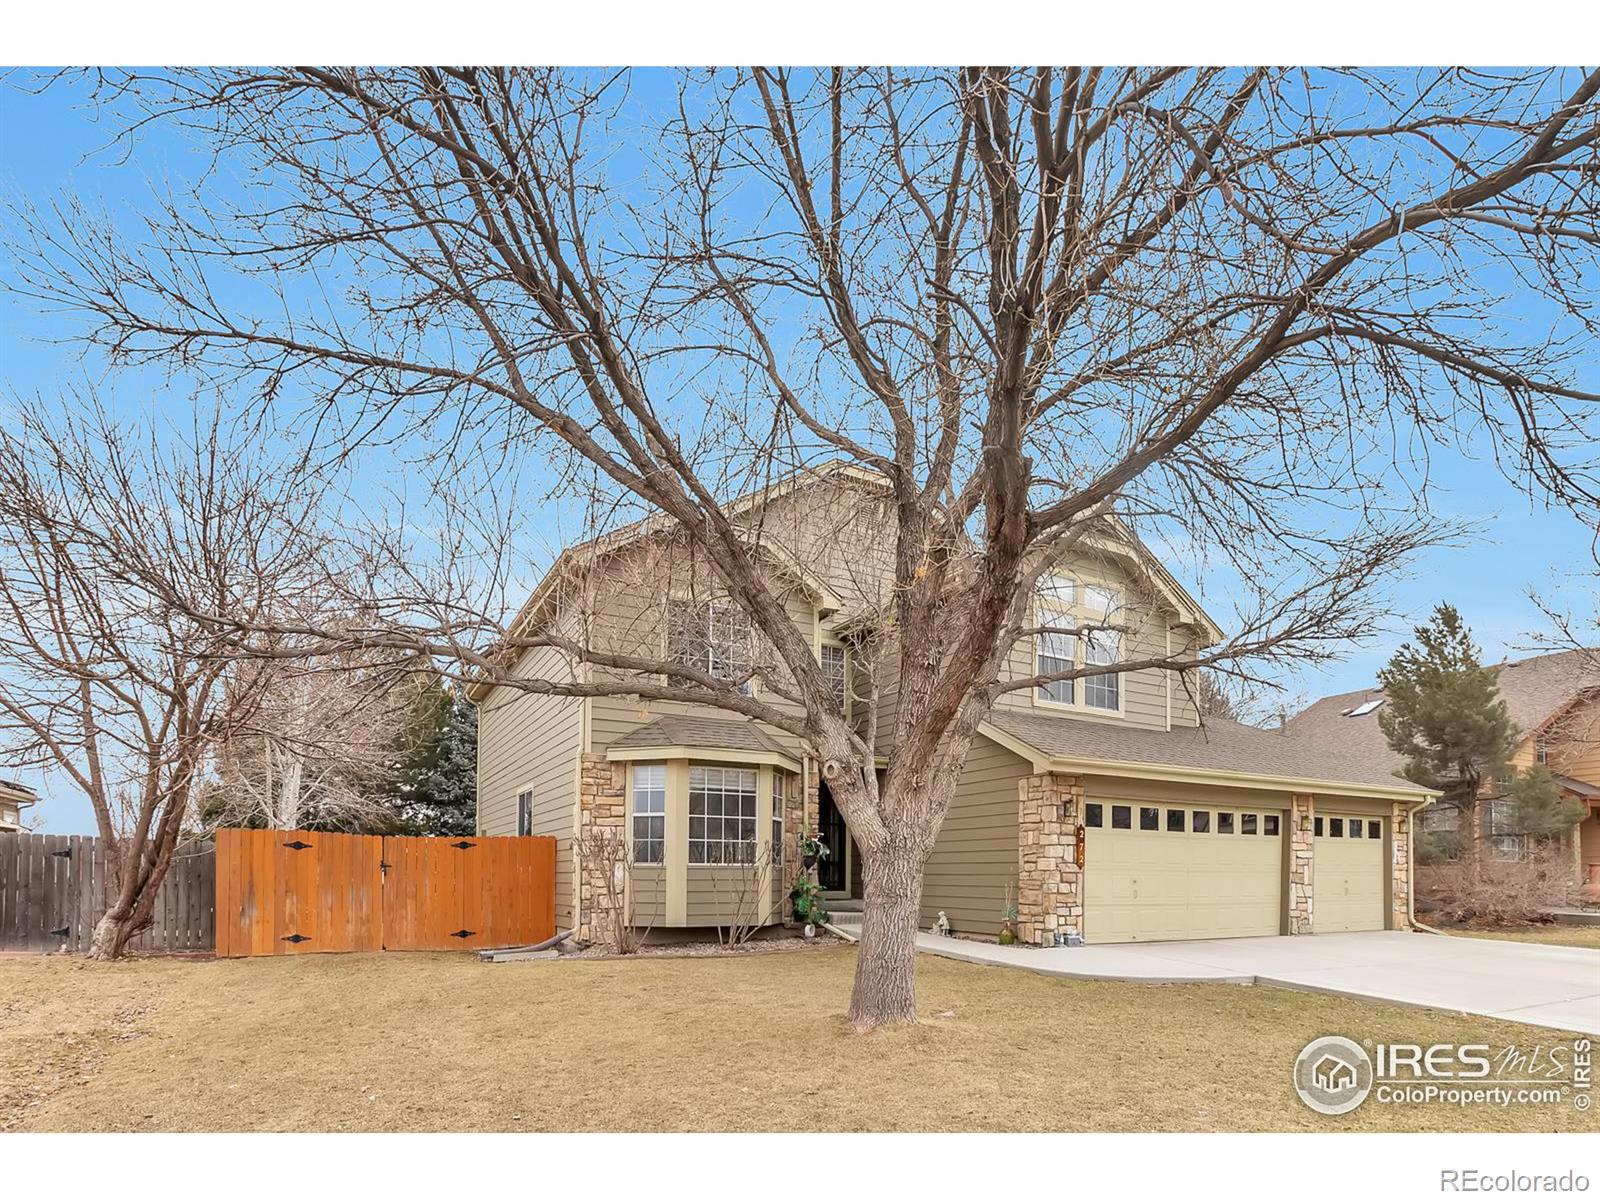 272  inverness street, broomfield sold home. Closed on 2023-05-15 for $585,000.